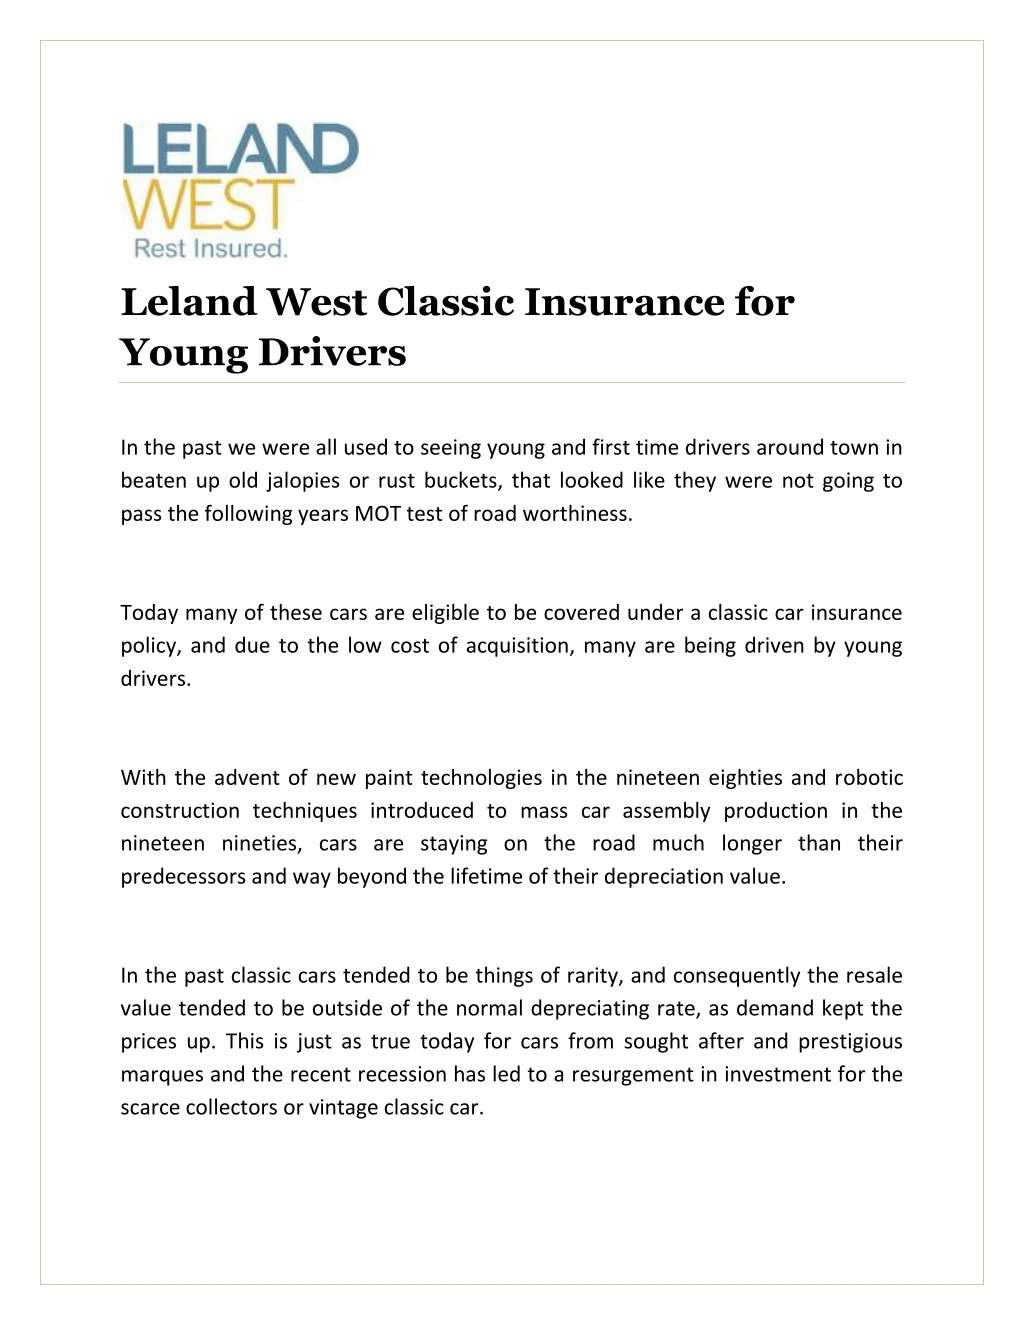 leland west classic insurance for young drivers